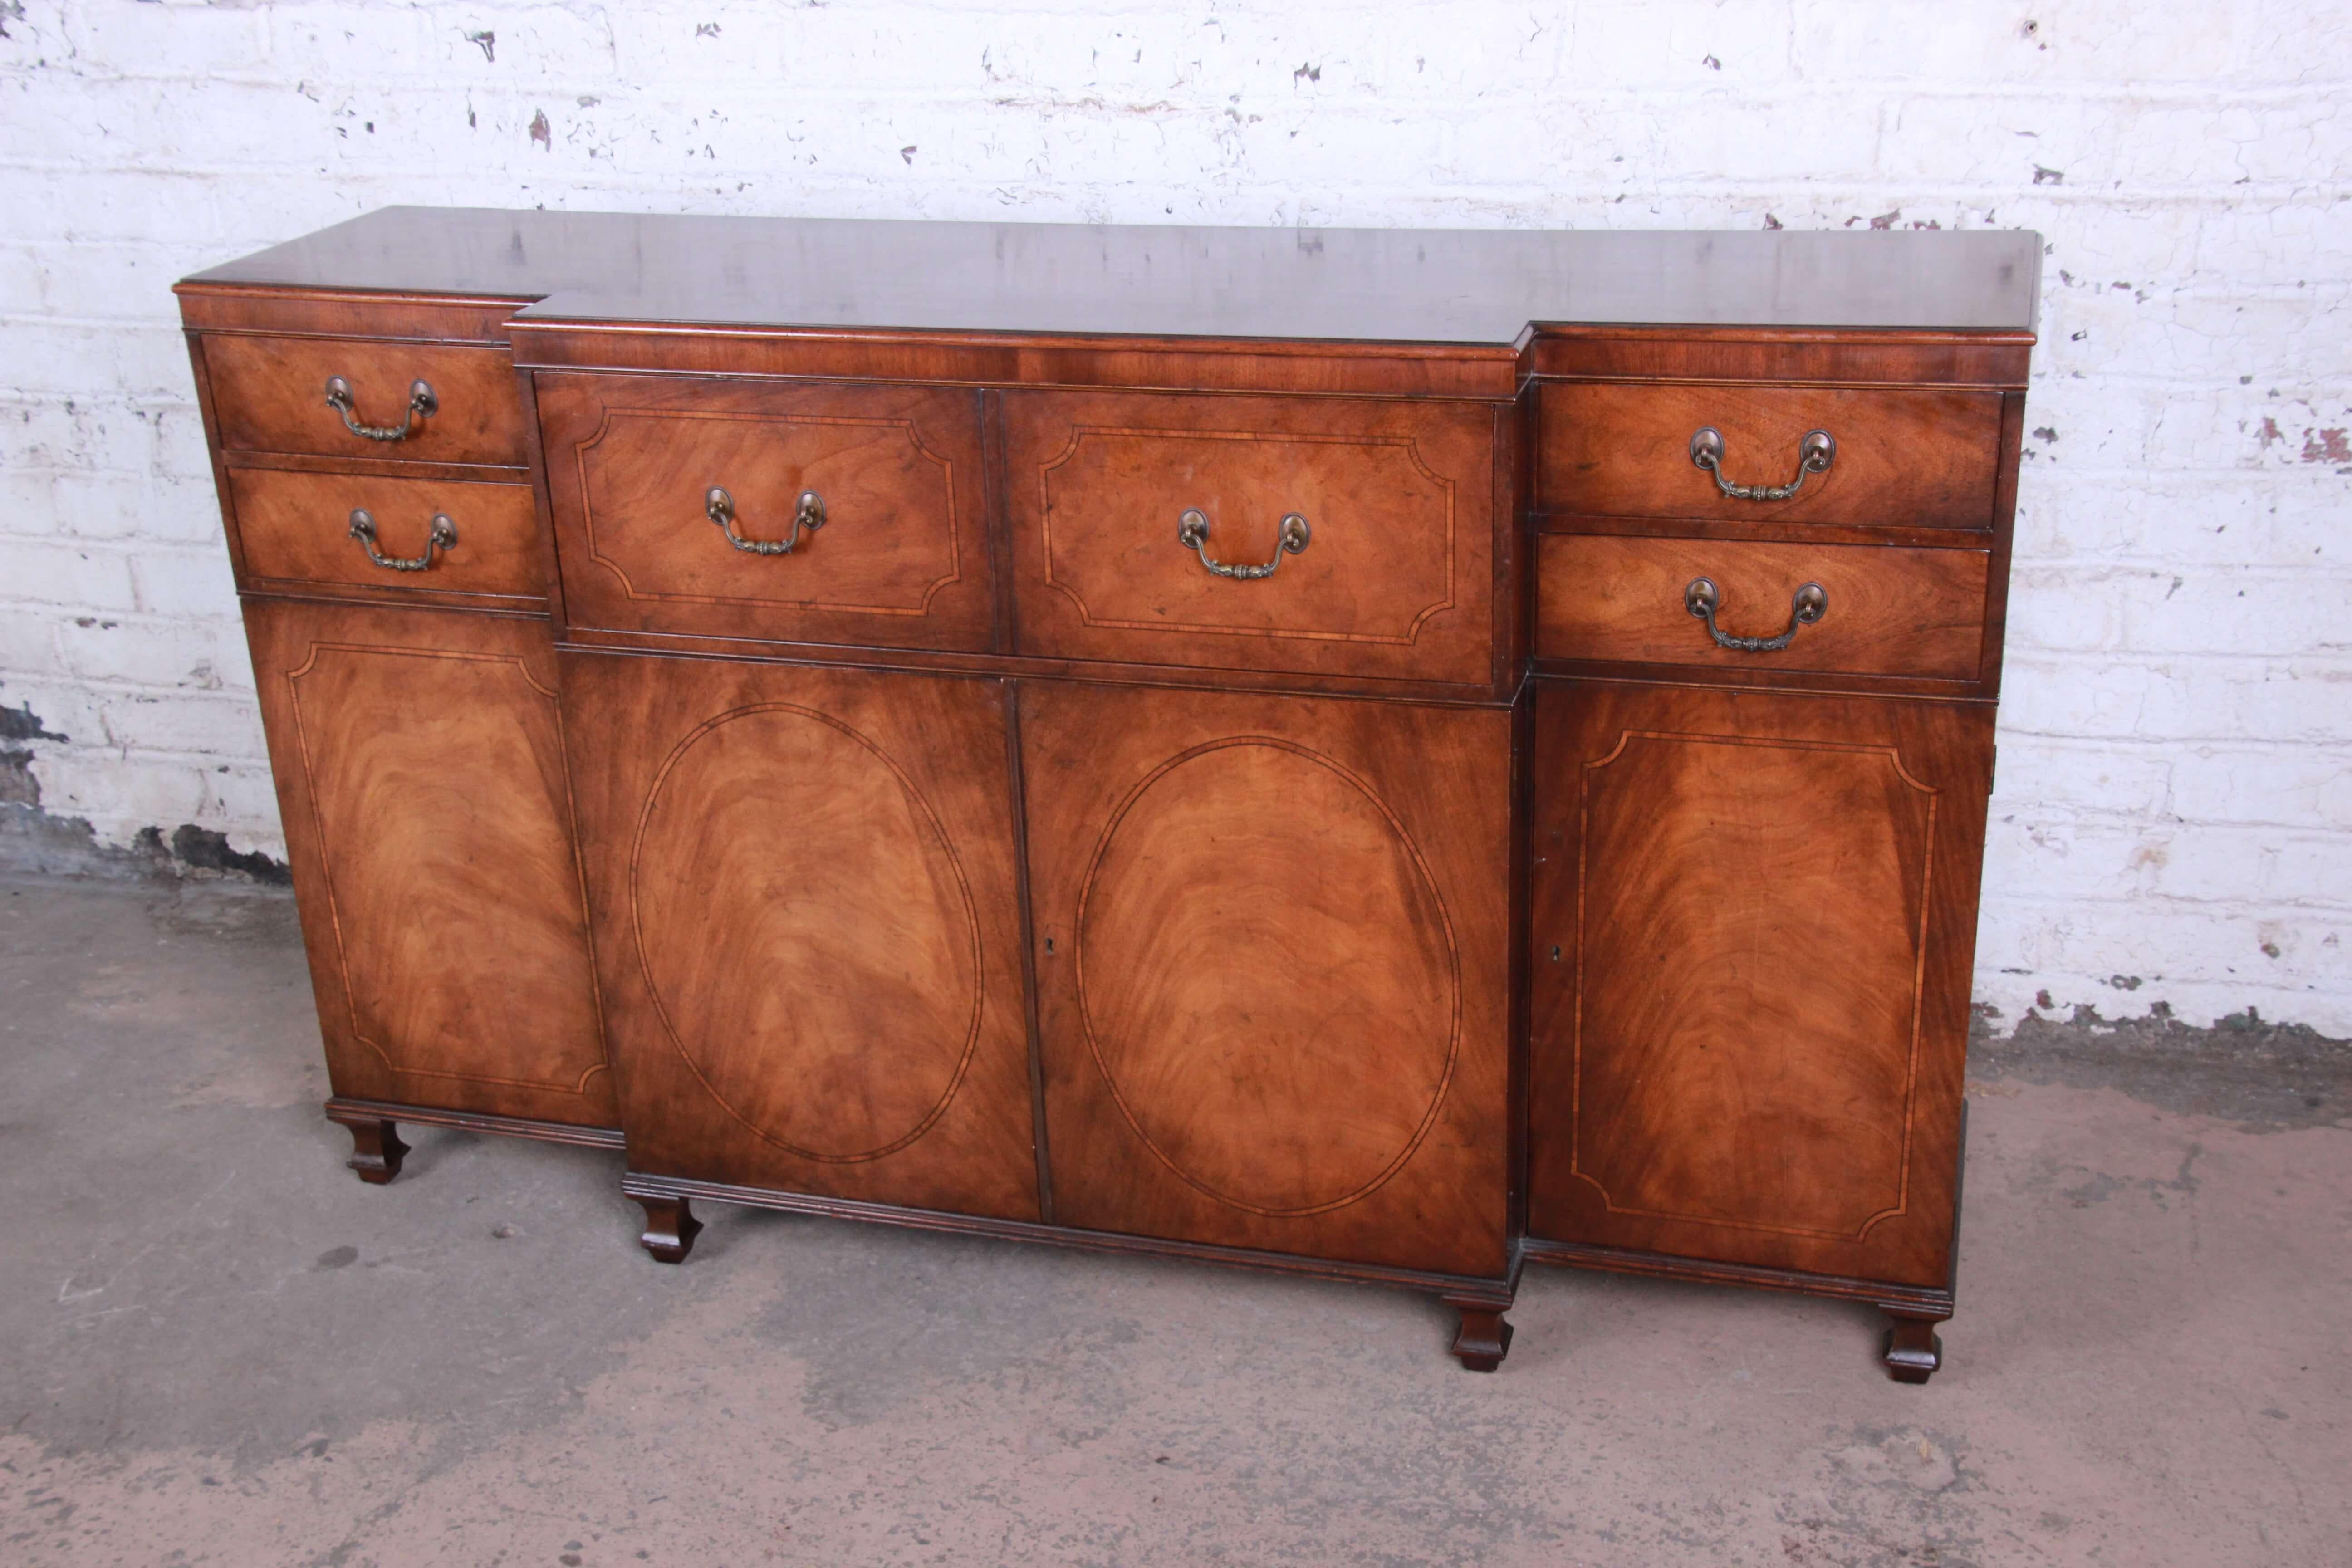 Offering a nice Baker Furniture banded mahogany sideboard or credenza. The credenza has a nice brown mahogany finish with inlaid banded designs and the drawer and doors. The top features two drawers on each side with a large drawer for ample storage